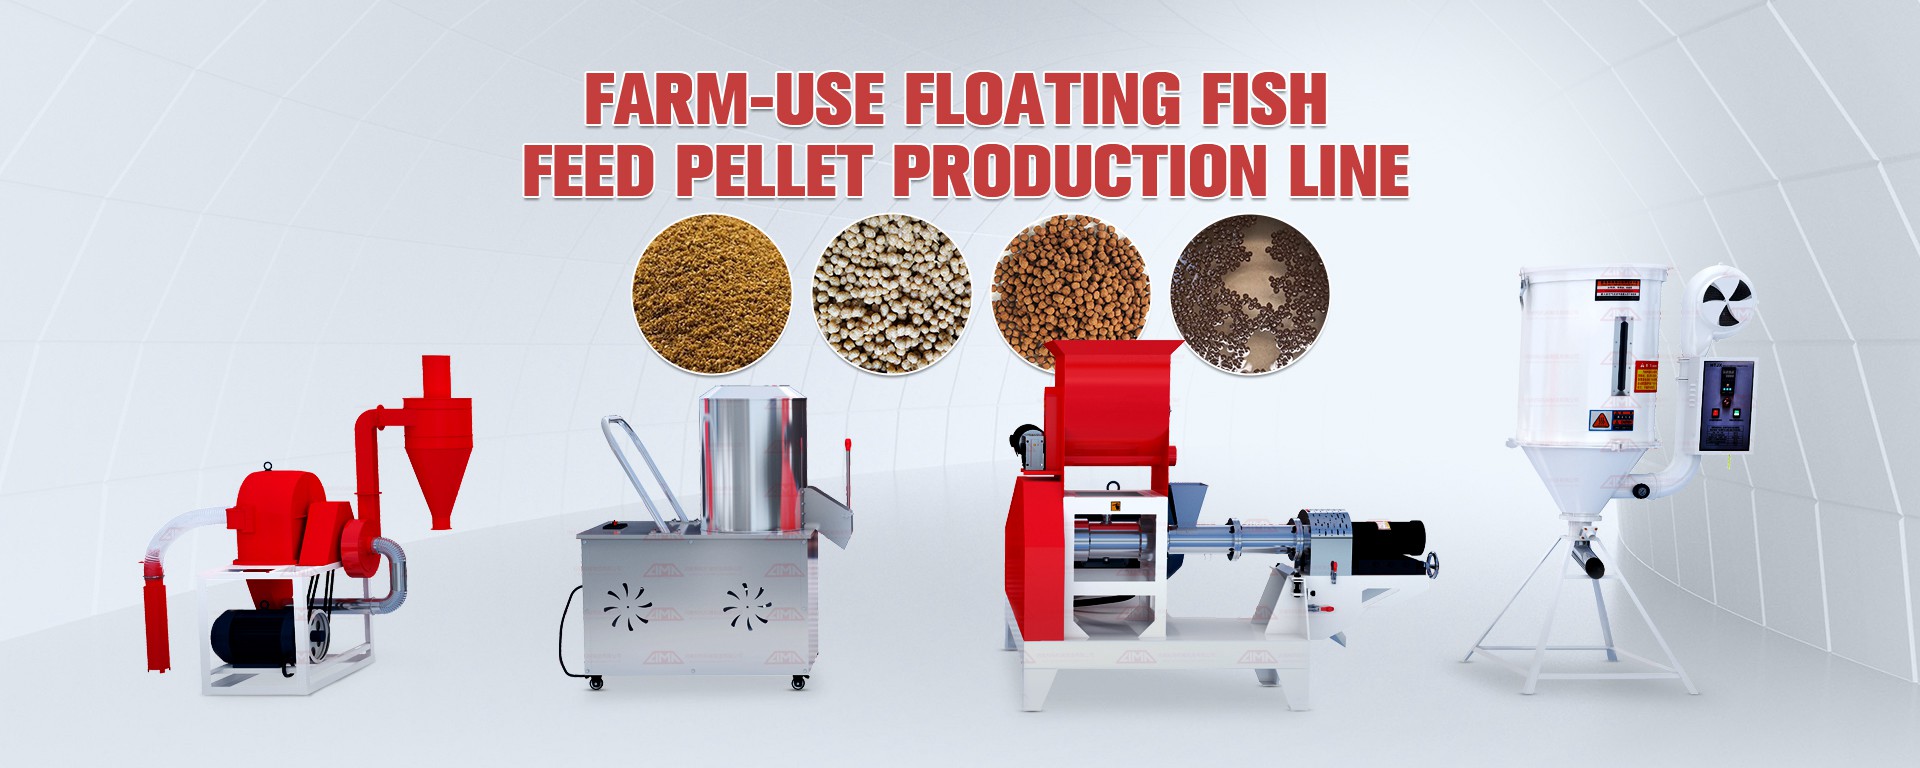 Farm-use floating fish feed pellet production line